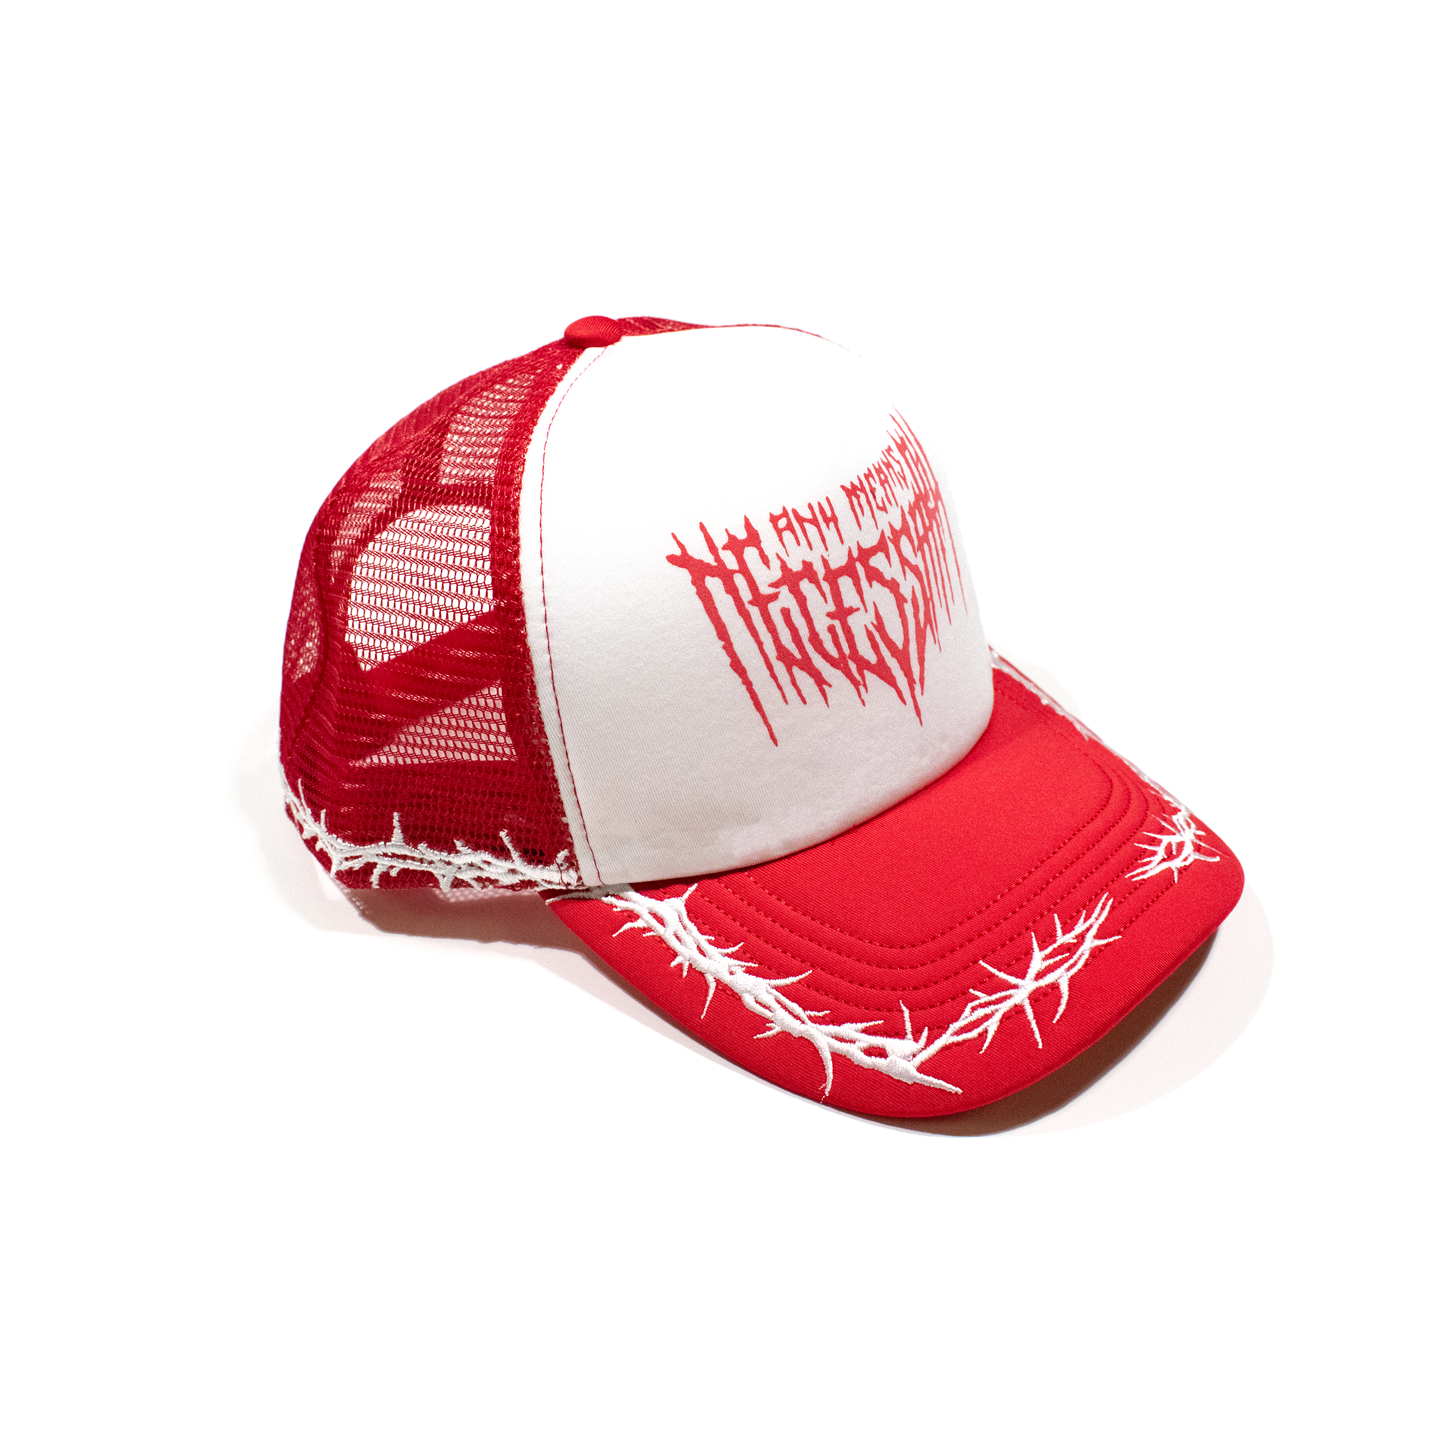 any means necessary shawn coss thorns mesh foam trucker hat red